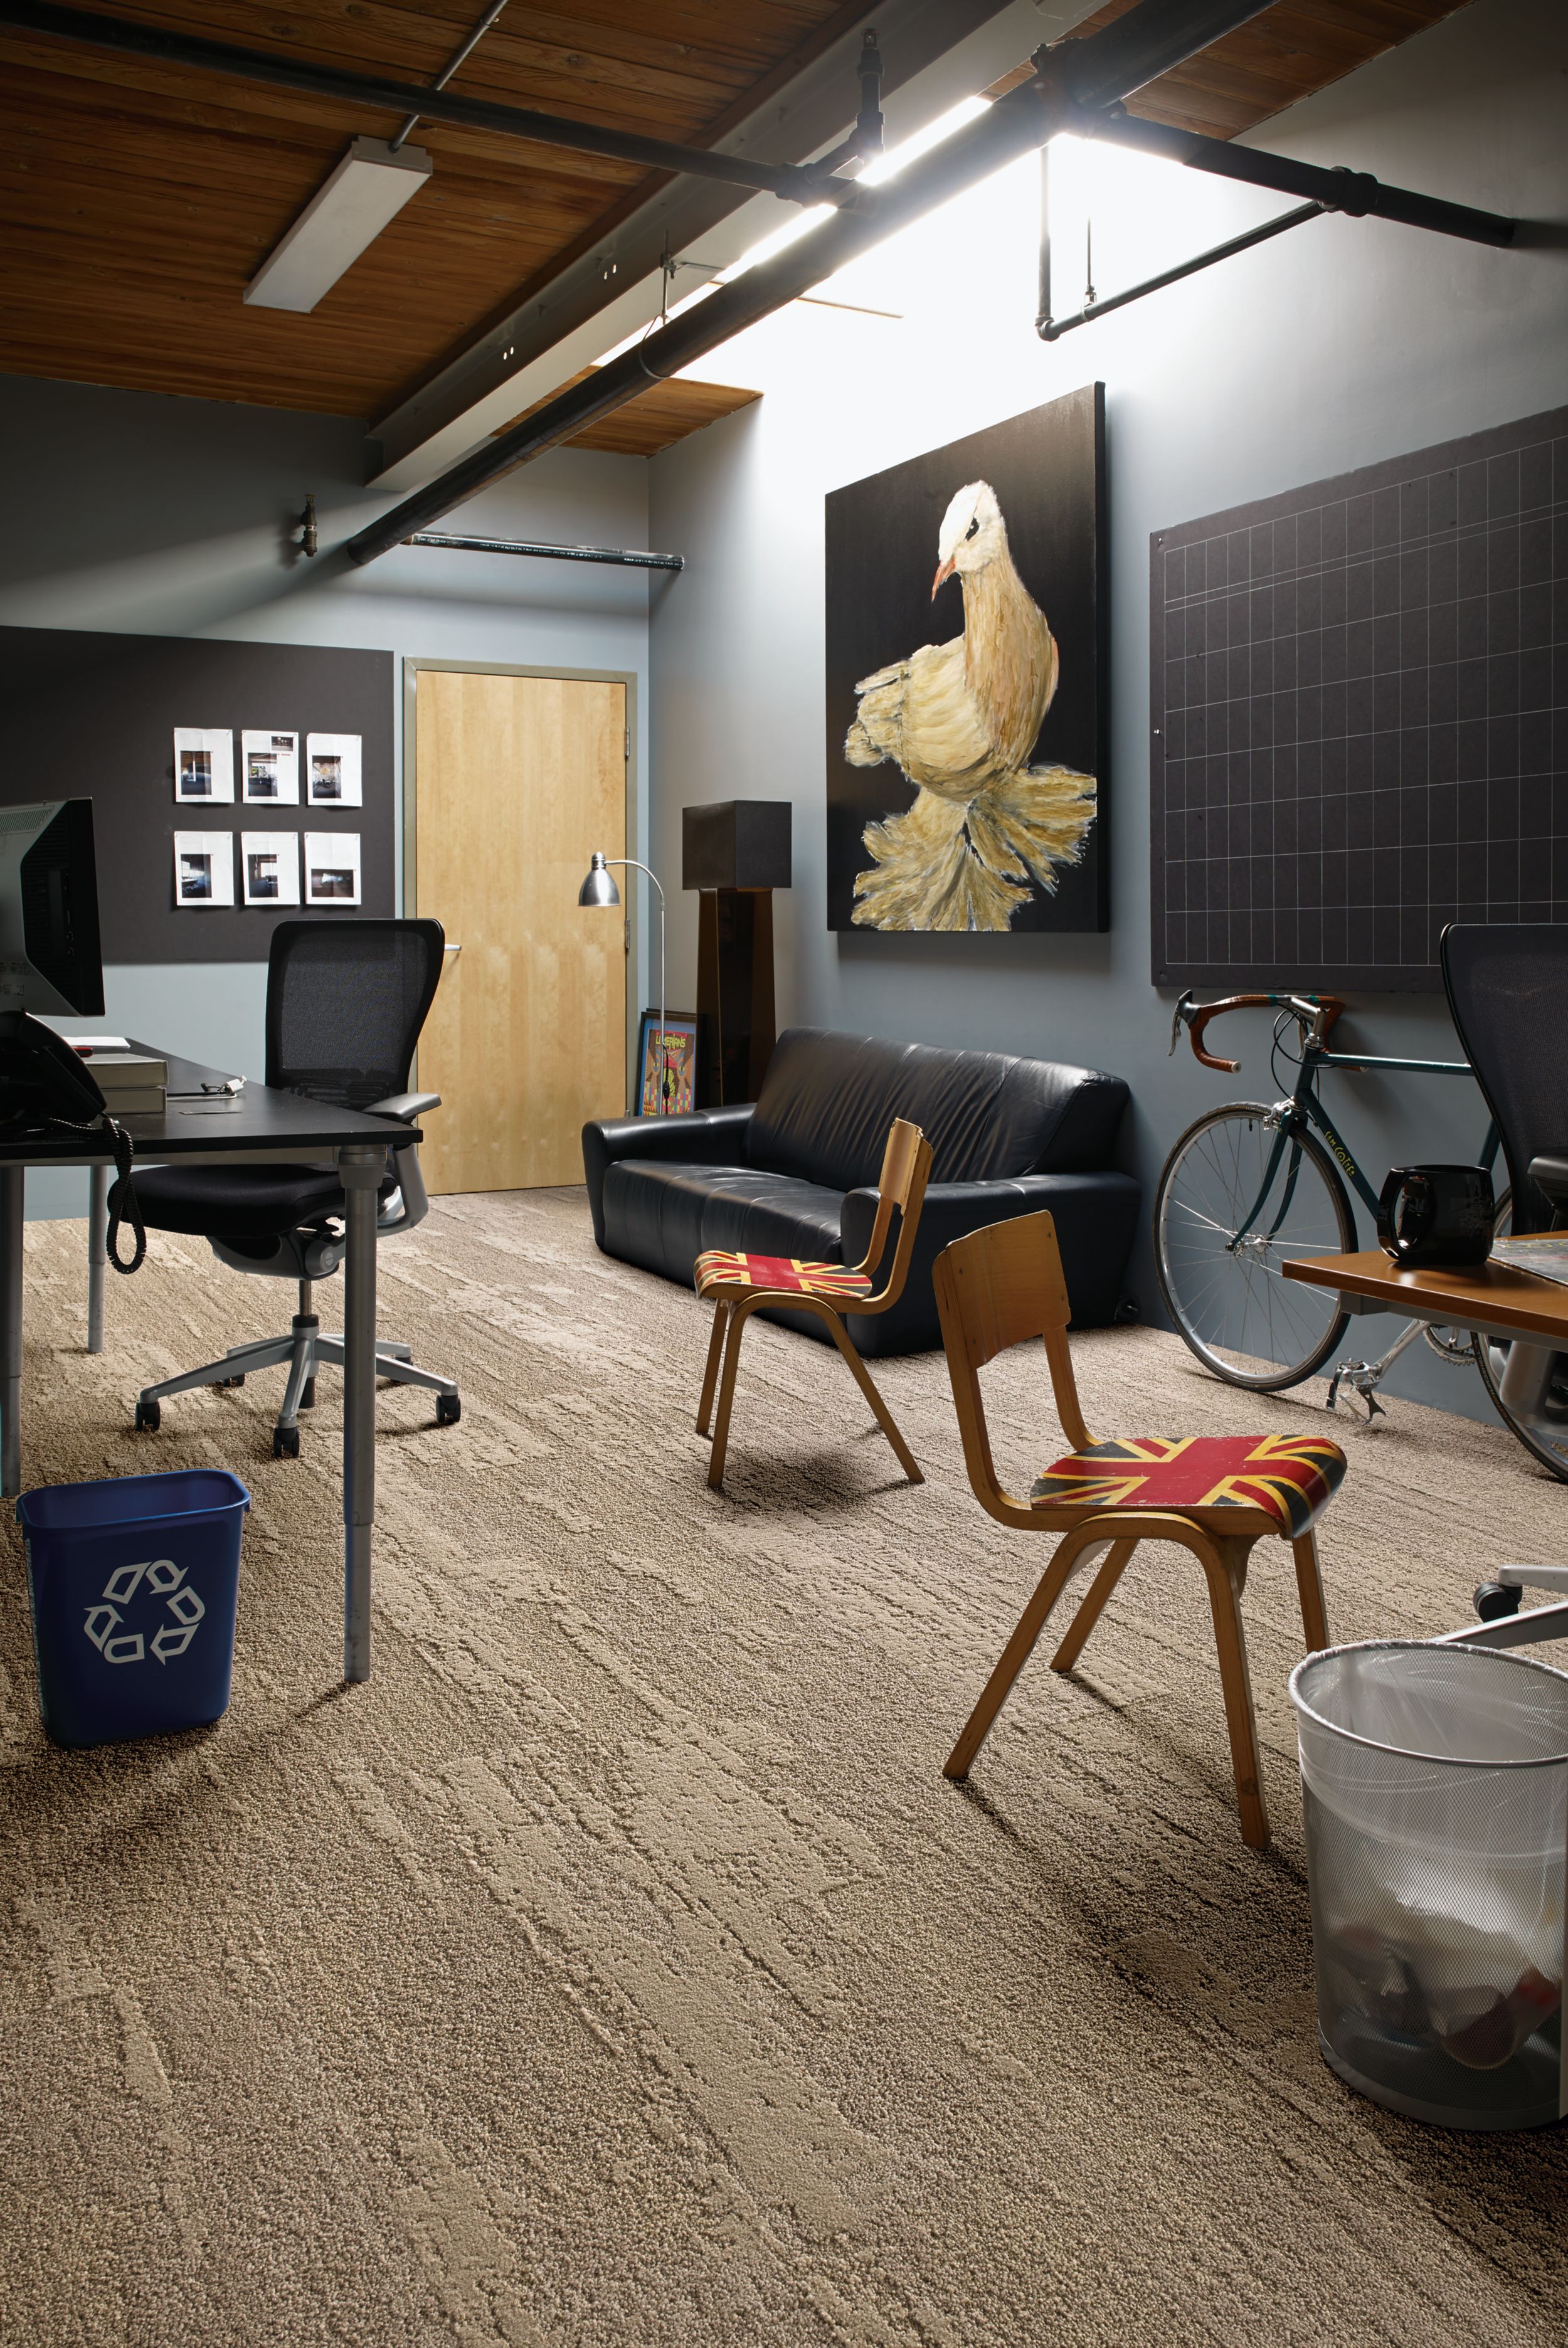 Interface NF401 plank carpet tile in private office space with bird artwork and no windows Bildnummer 8